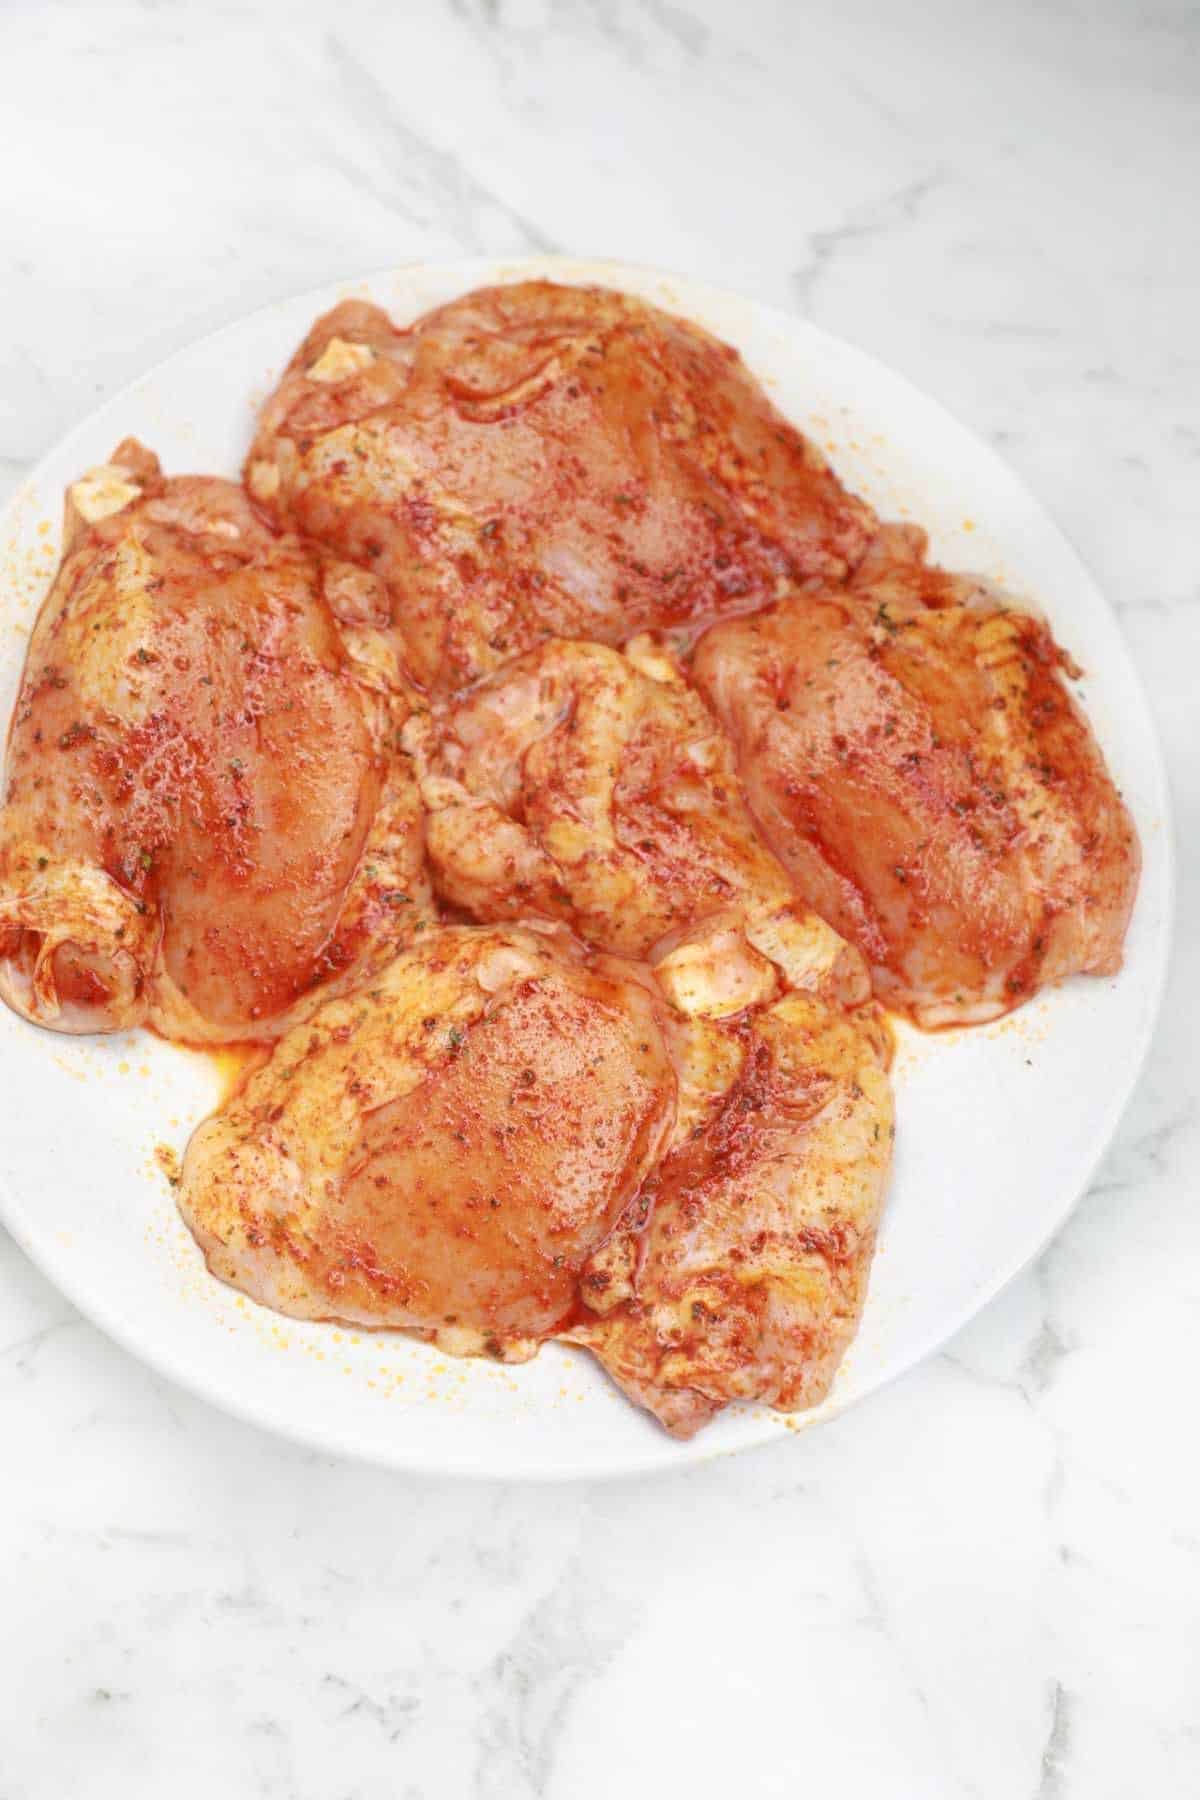 marinated thighs on a plate.